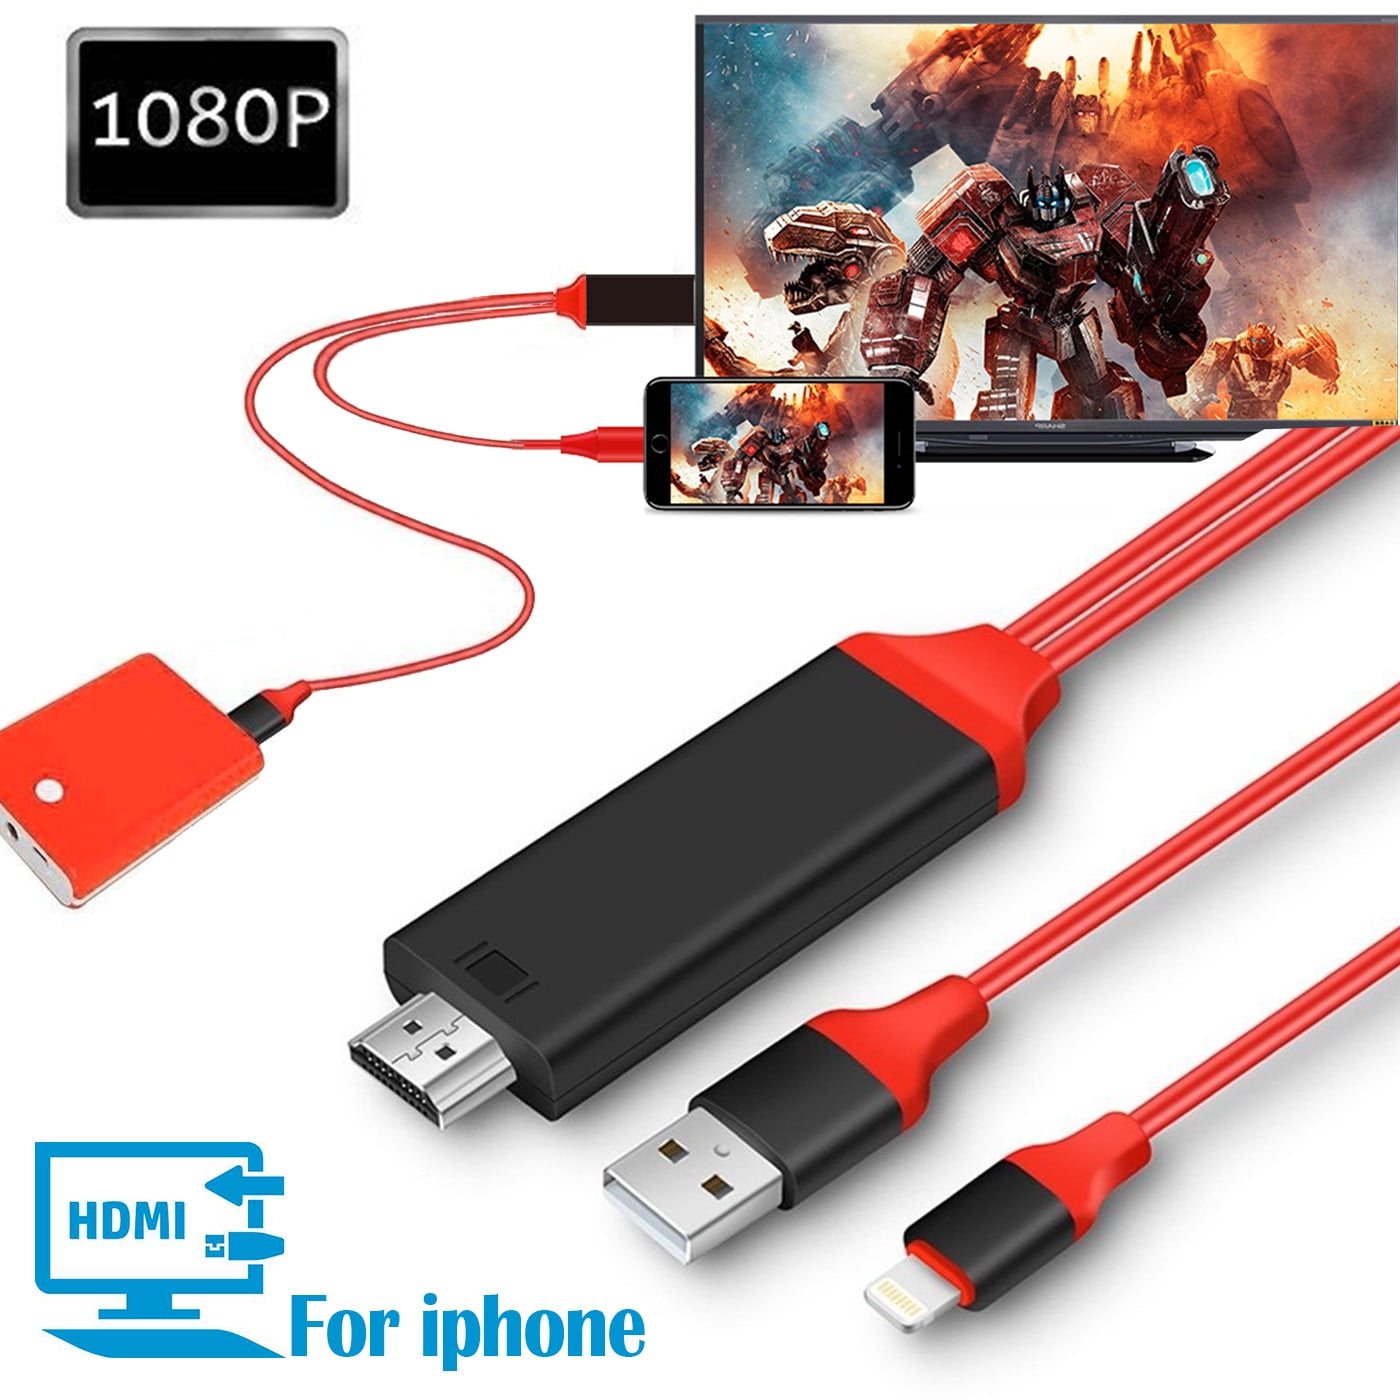 Compatible with iPad iPhone to HDMI Adapter Cable, Digital AV Adapter - Ver Ipad En Tv Con Cable Hdmi